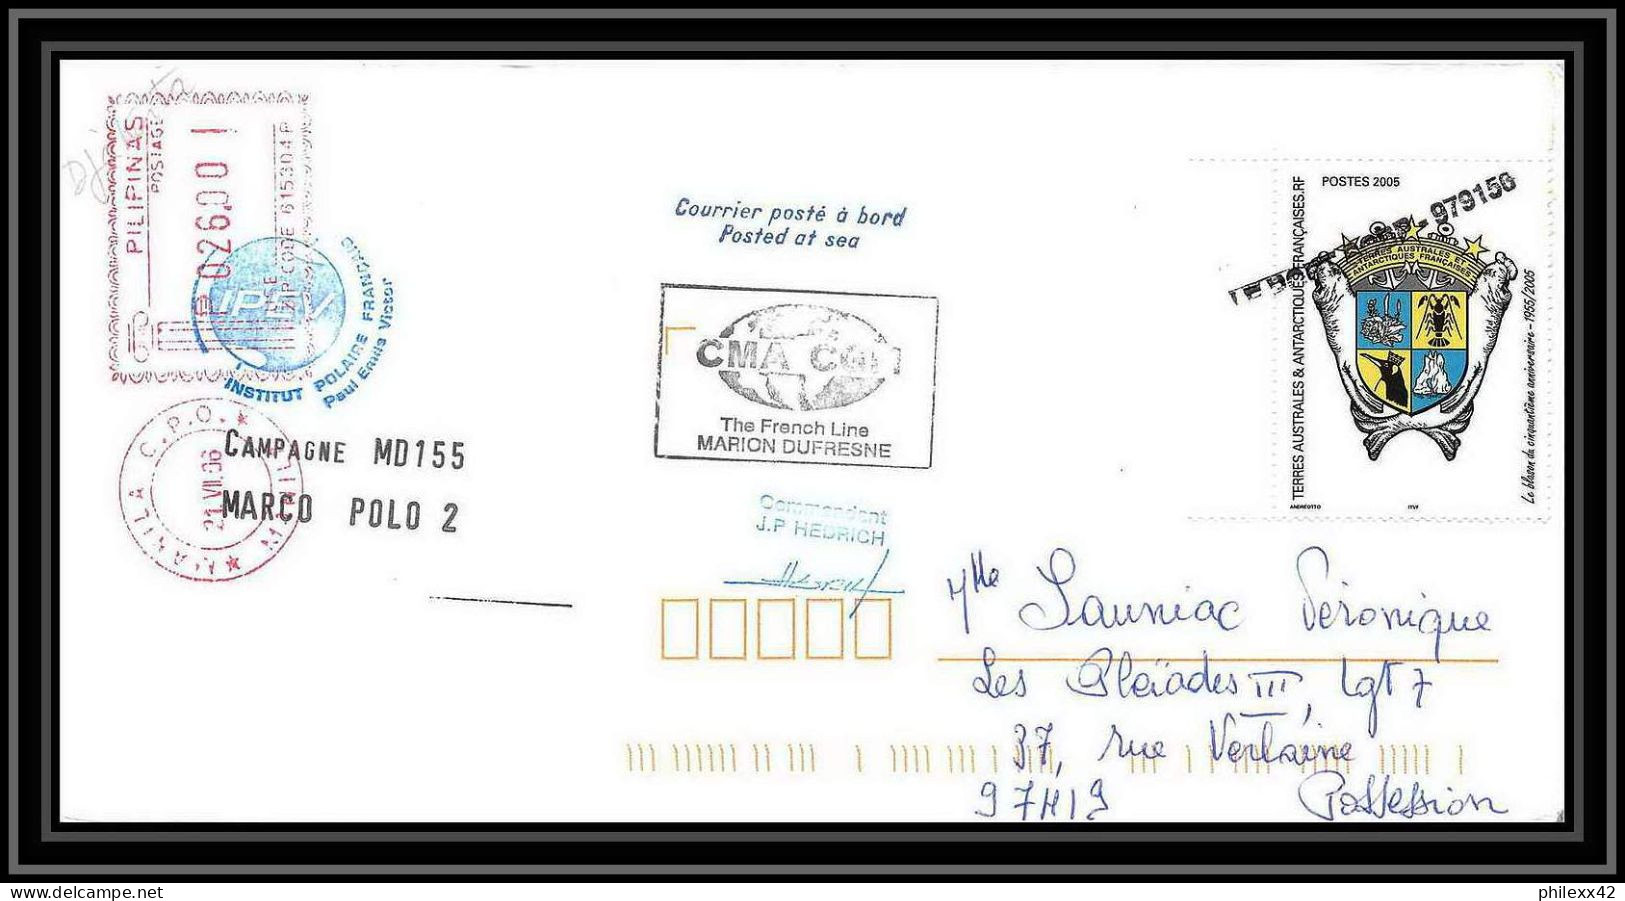 2592 ANTARCTIC Taaf Philippines Pilipinas Mixte Lettre Cover Dufresne 2 Signé Signed Md 155 Marco Polo 2 2006  - Filipinas